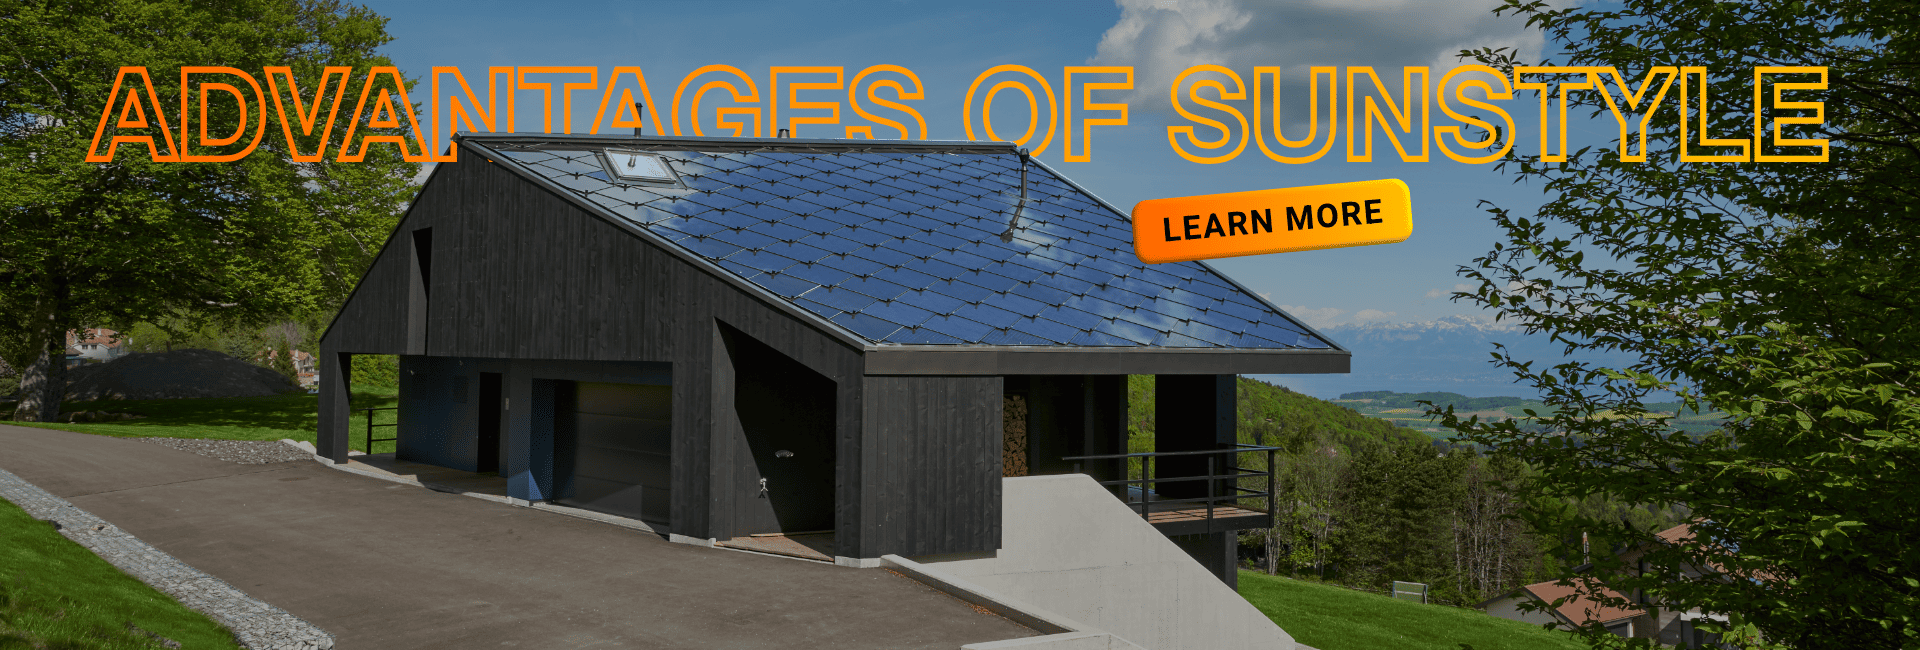 The advantages of SunStyle solar tiles